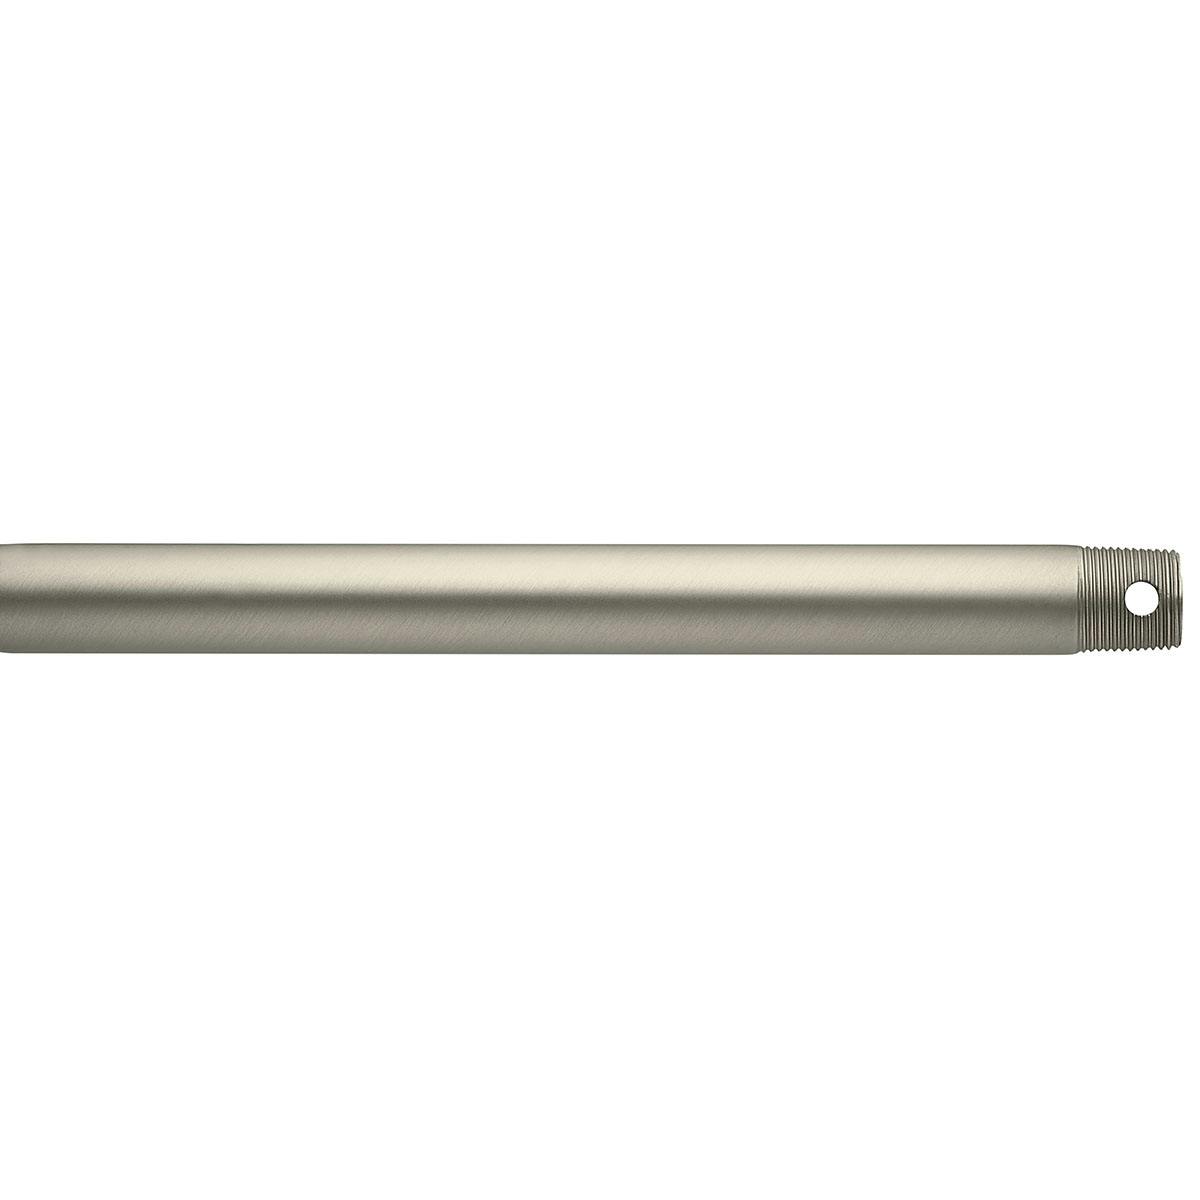 Dual Threaded 48" Downrod Brushed Nickel on a white background